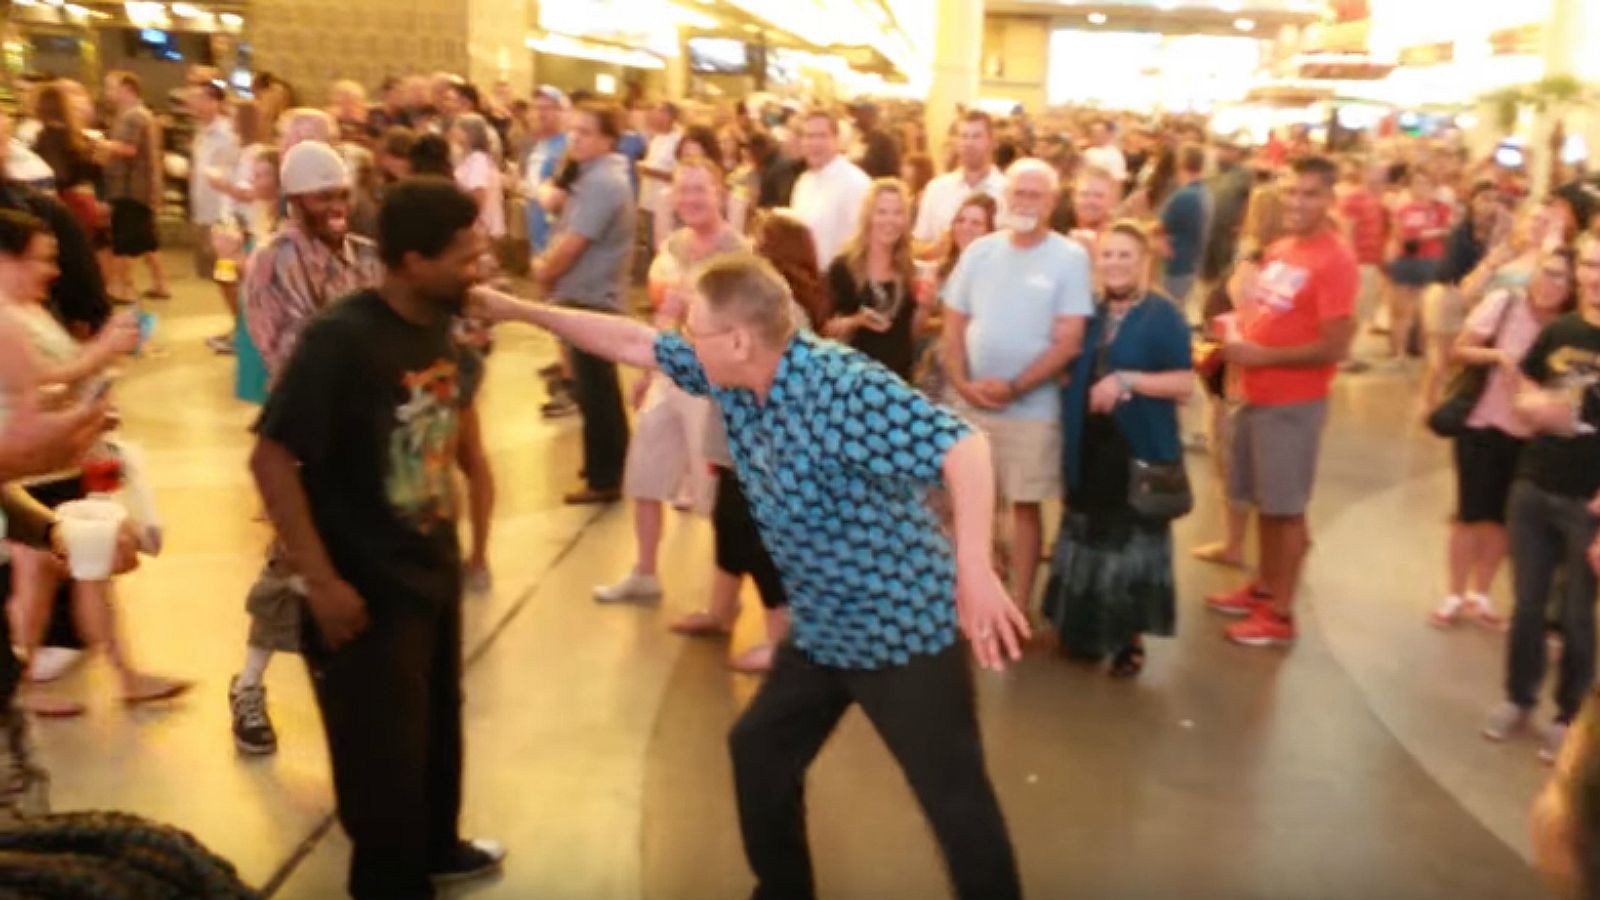 2 Young Men Challenge Grandpa to a Break Dance Battle. The Crowd Goes Wild When He Does THIS!